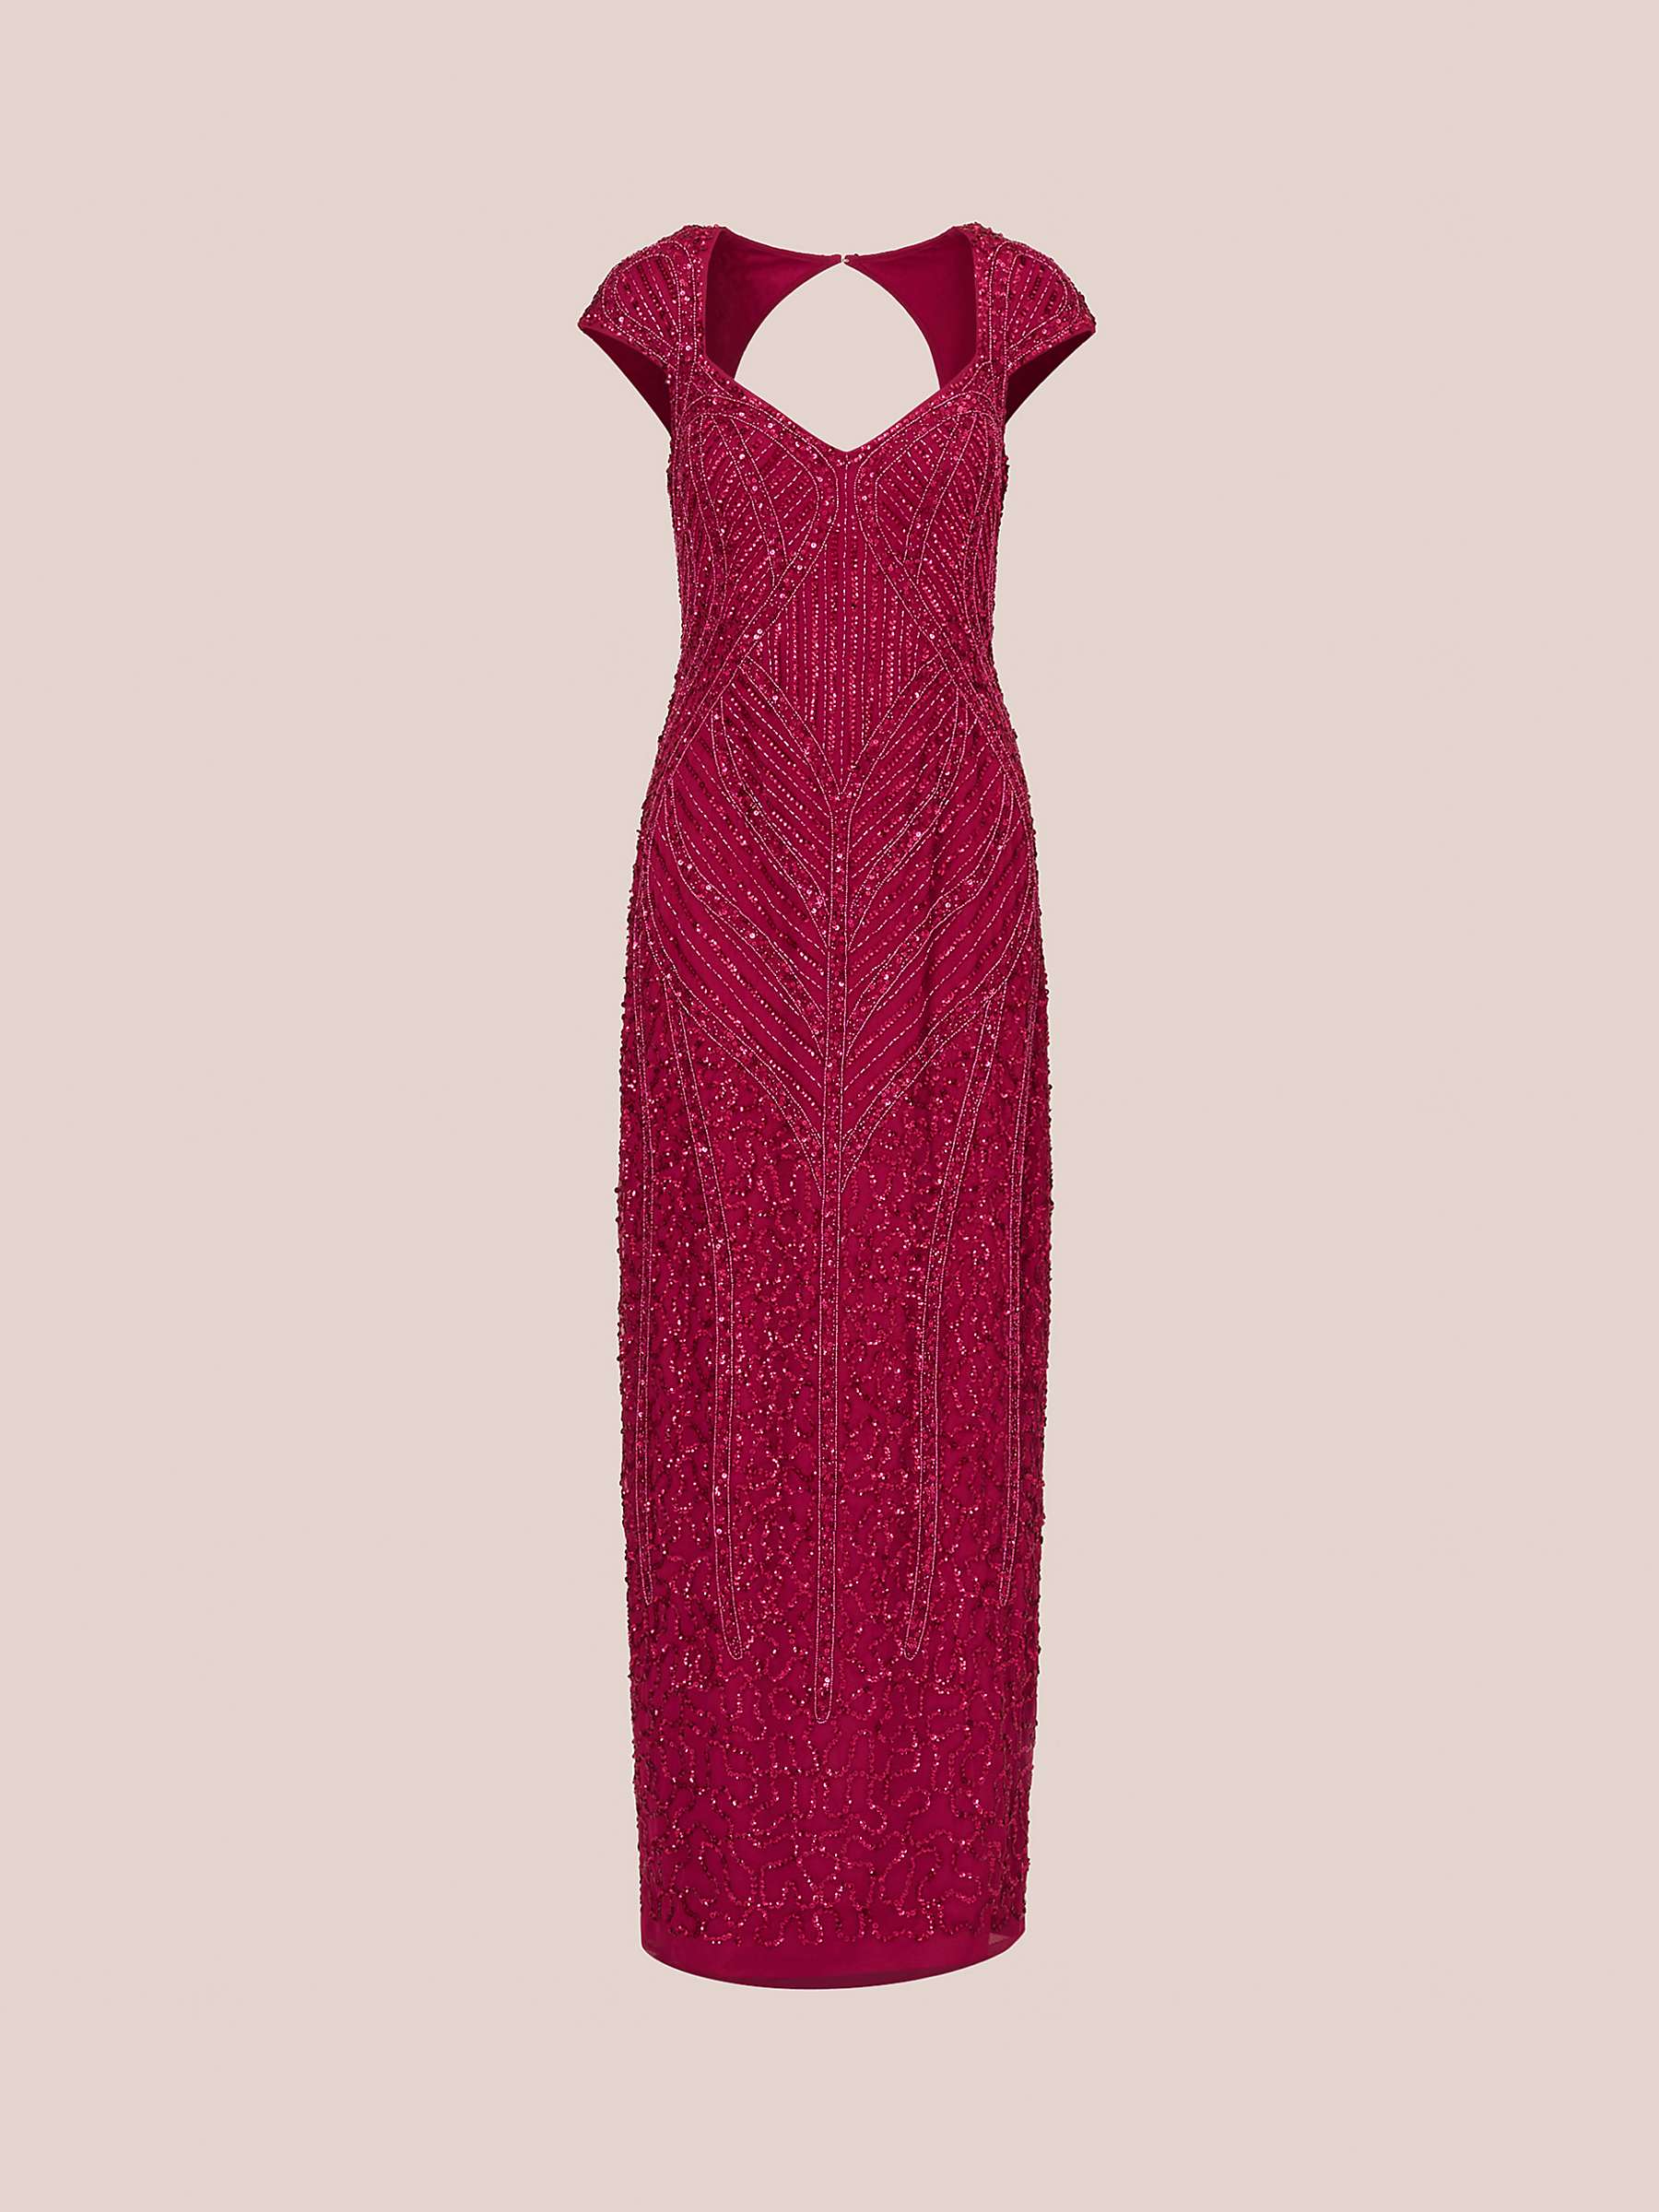 Buy Adrianna Papell Beaded Column Gown Dress, Magenta Online at johnlewis.com